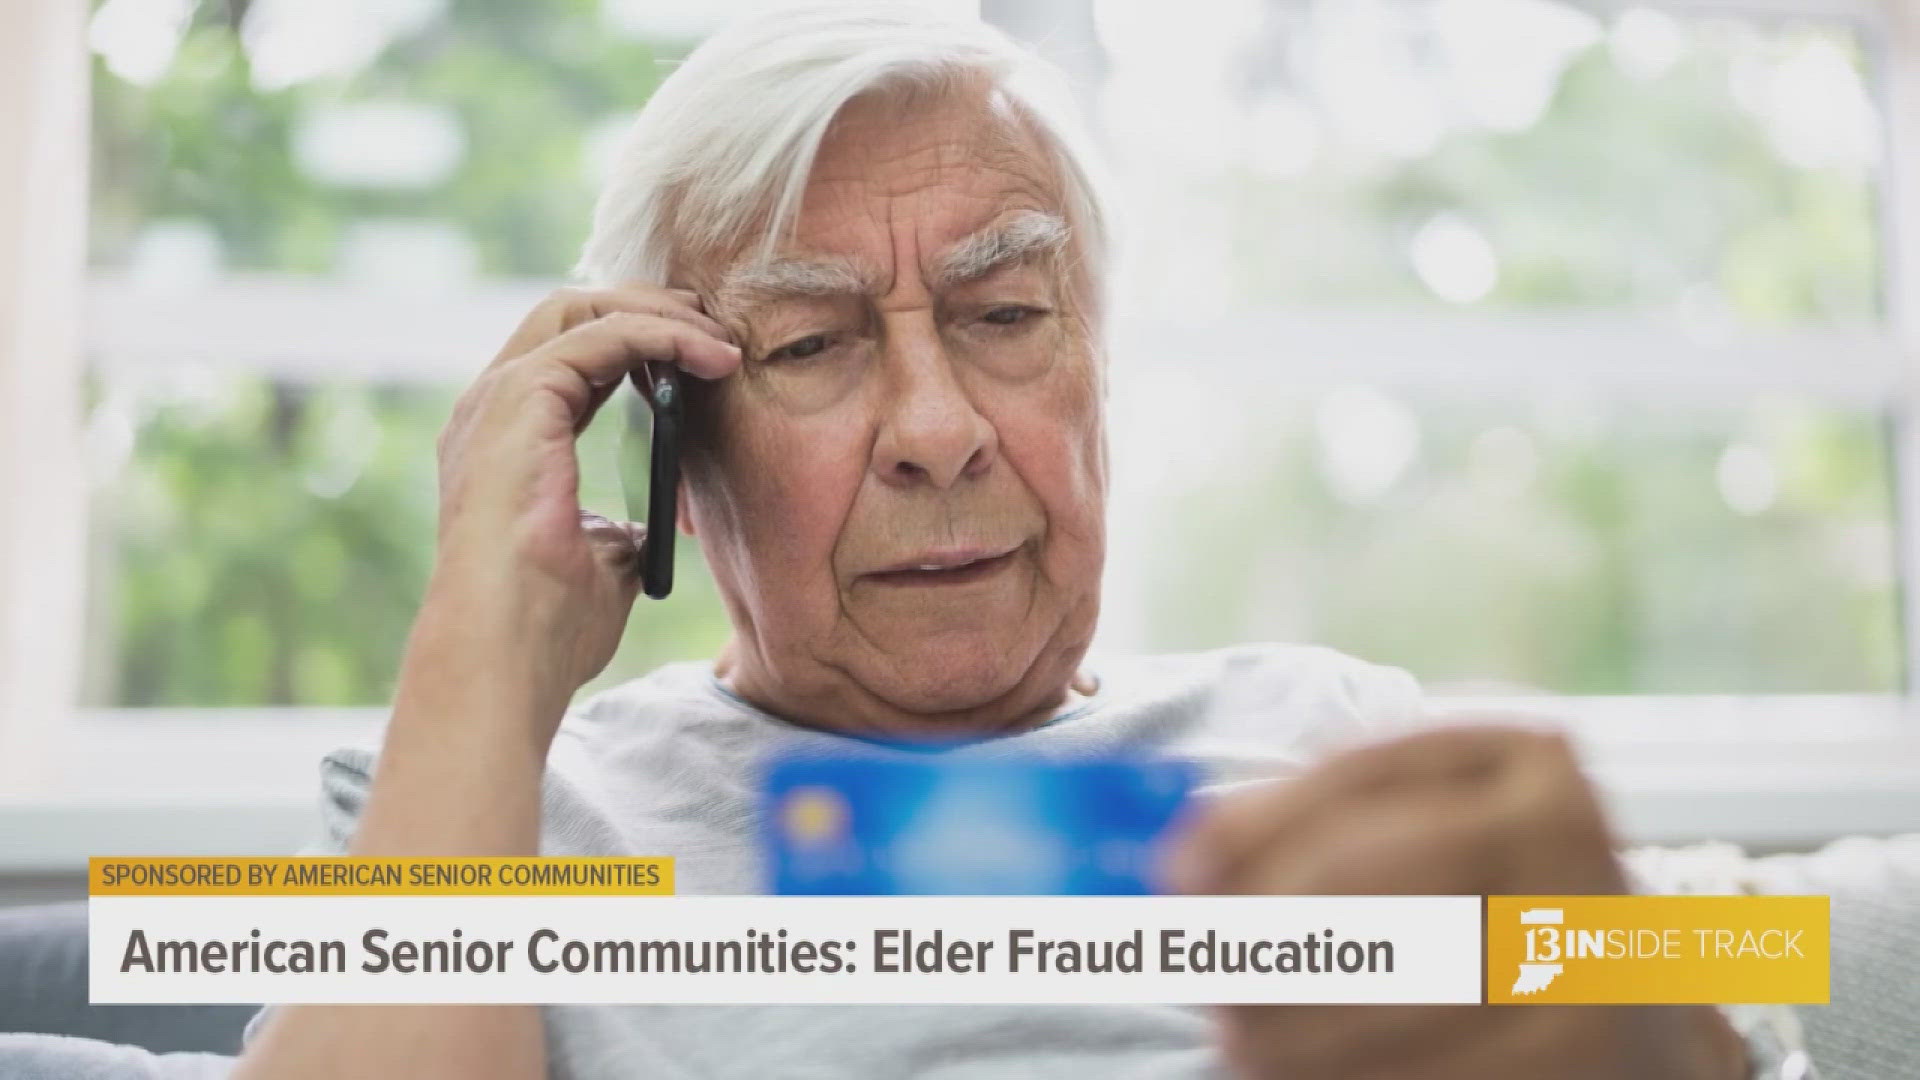 ASC is committed to educating seniors and their families about elder fraud, offering expert advice and resources to help detect and prevent scams.